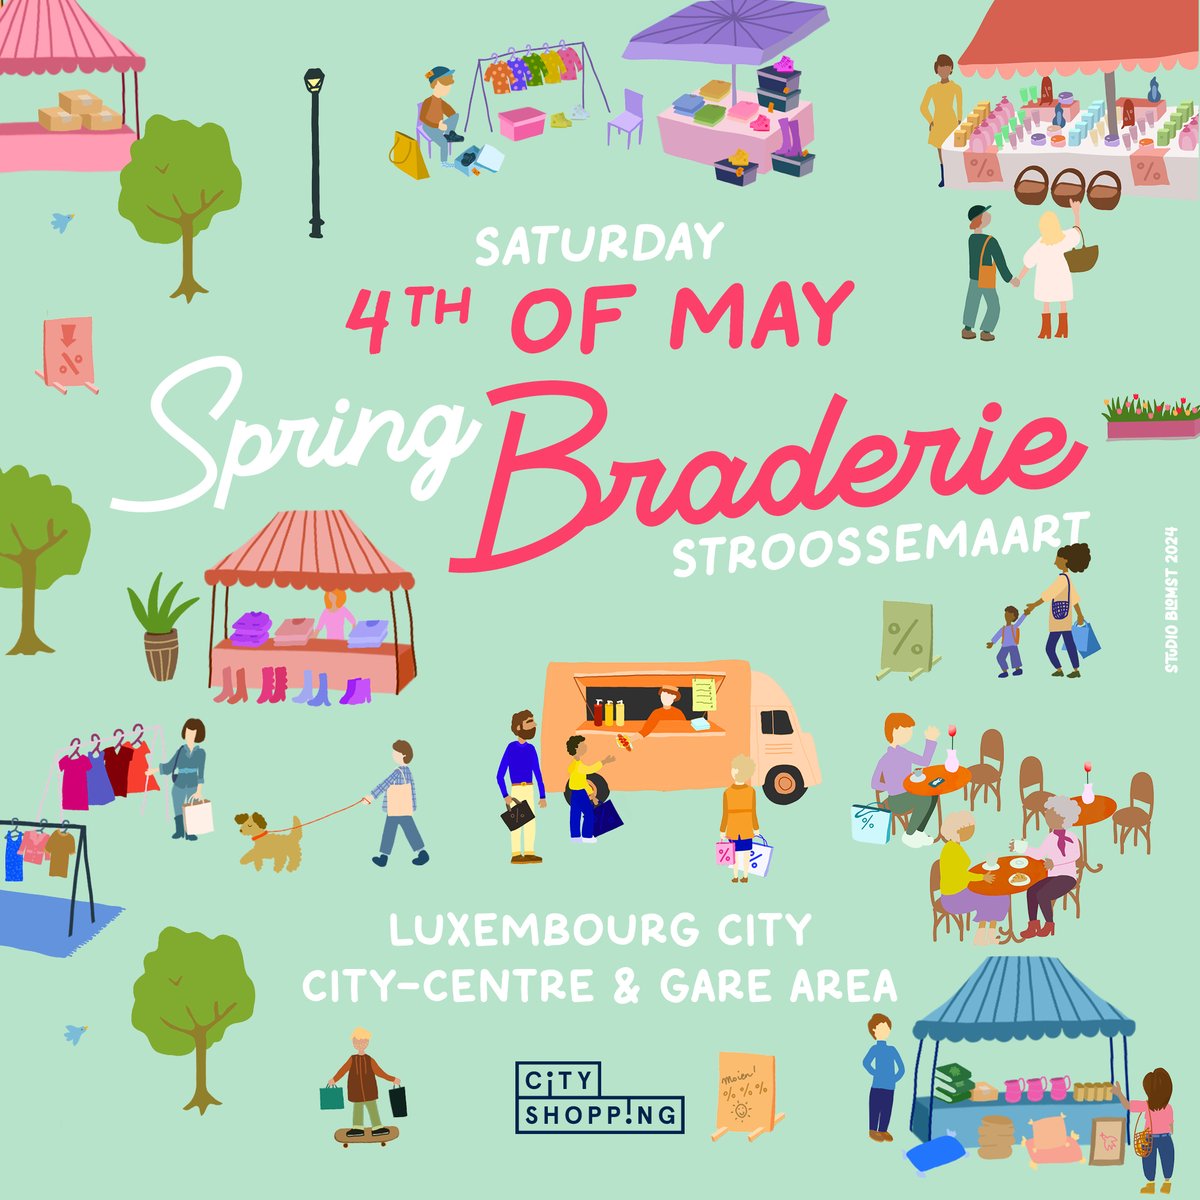 This Saturday, 4 May, the “Stroossemaart” street market will be taking place. 😀 Don’t miss this opportunity and shop for bargains on the streets of the capital from 9:00 to 19:00. 🛍️ 👉 Full information on how to get from A to B: gd.lu/7r6kVZ